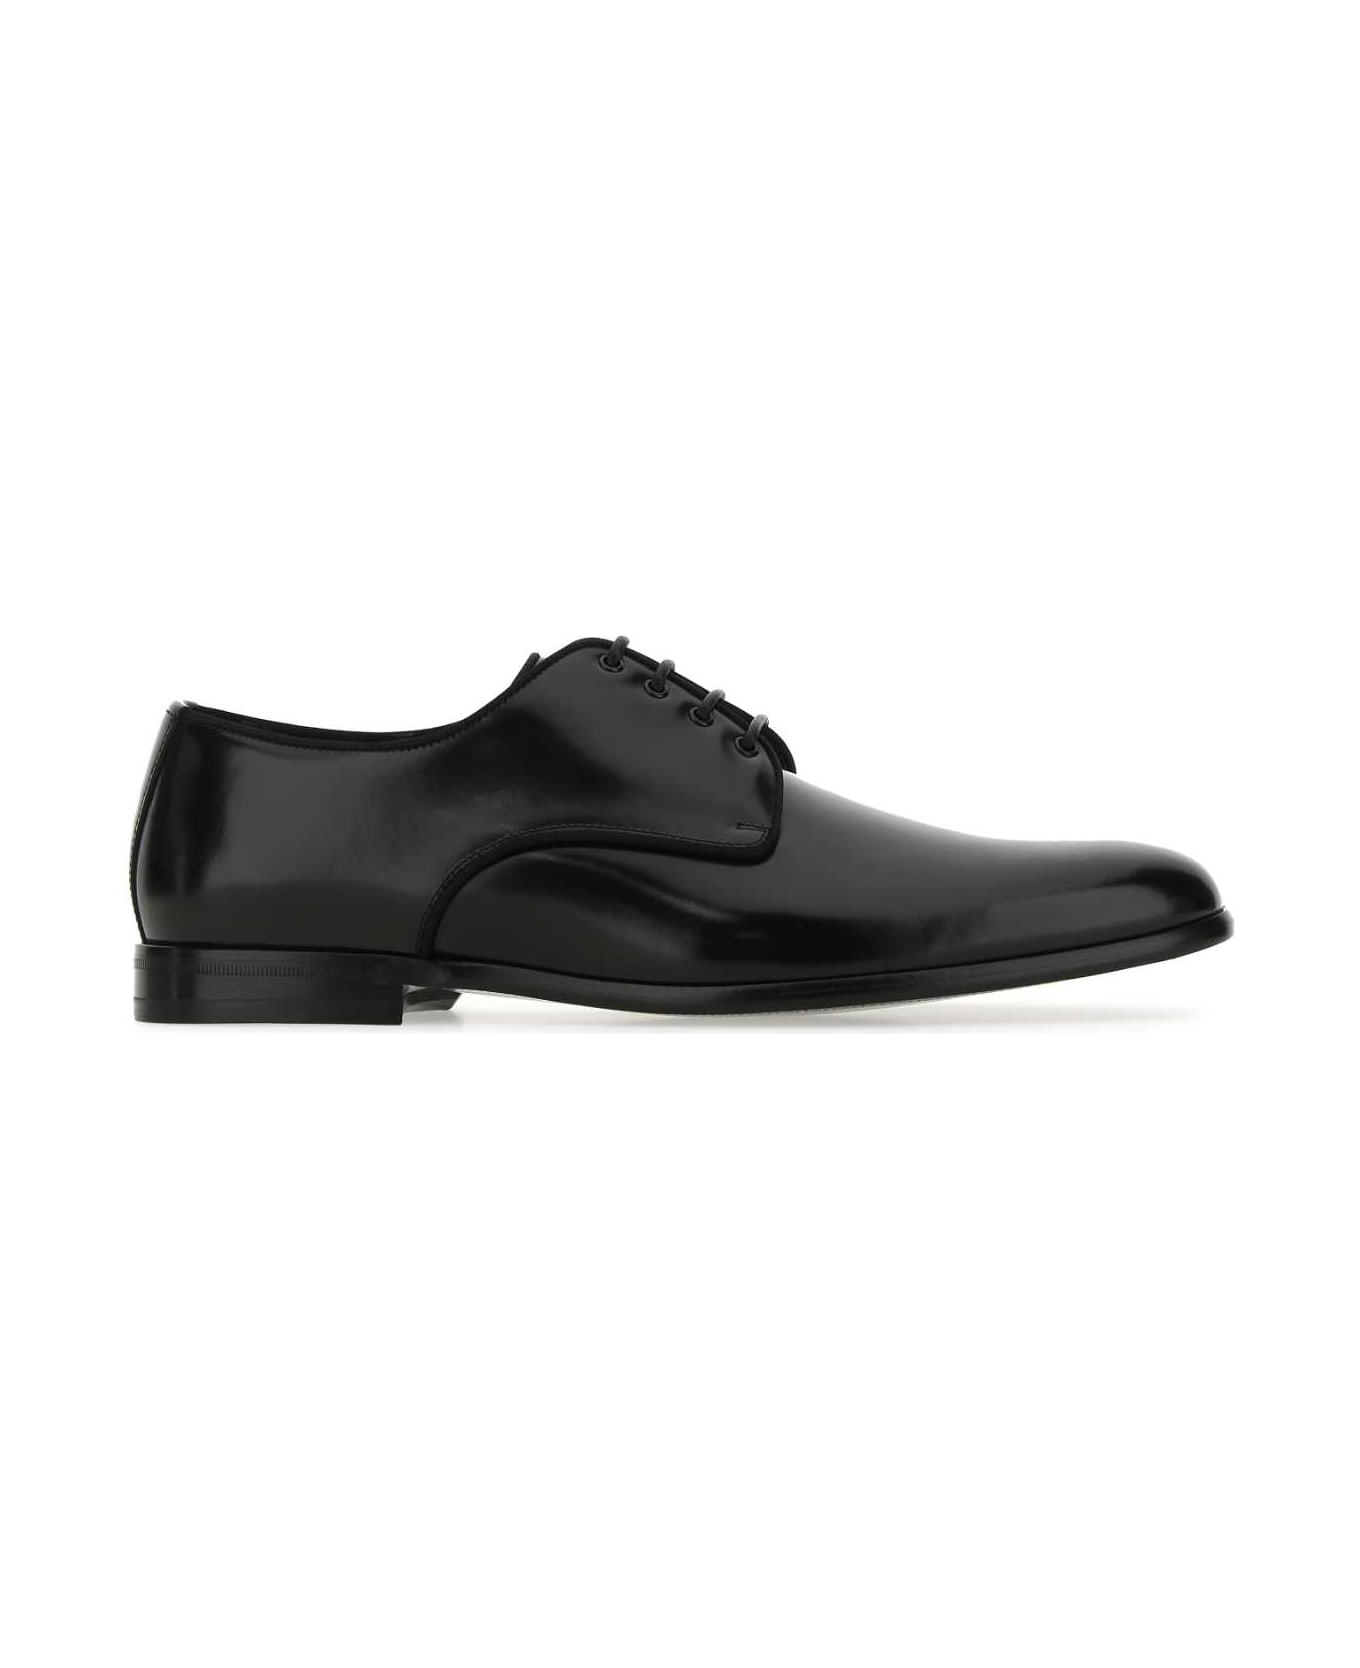 Dolce & Gabbana Black Leather Lace-up Shoes - 80999